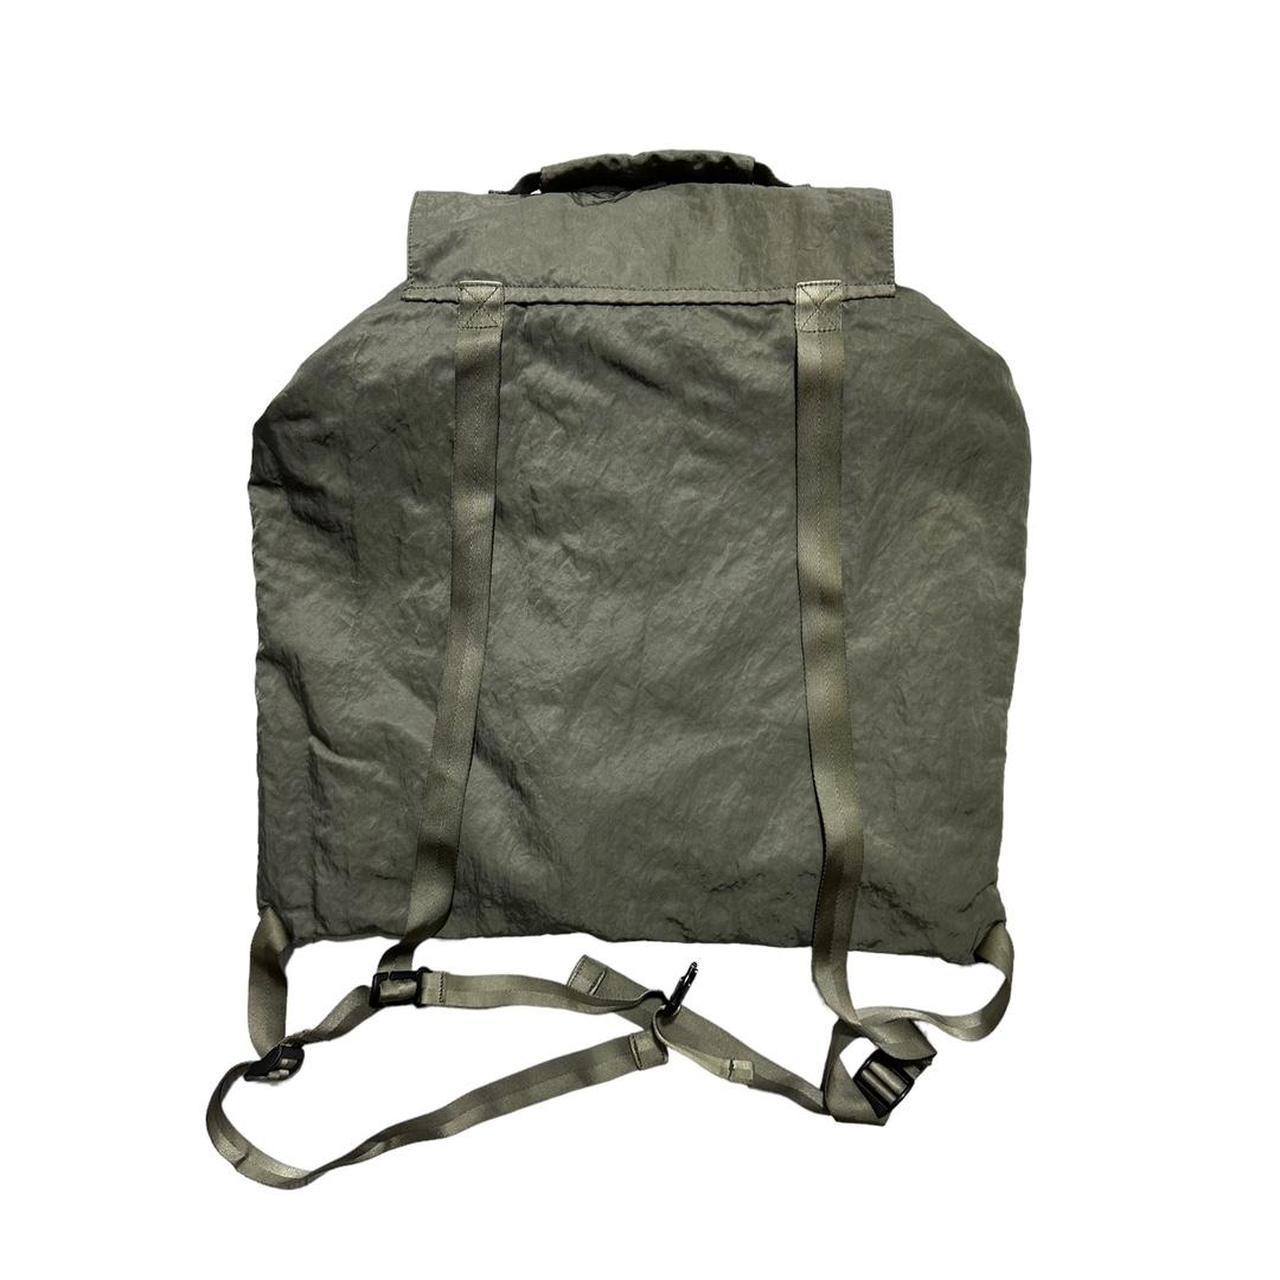 CP Company Green Backpack - Known Source